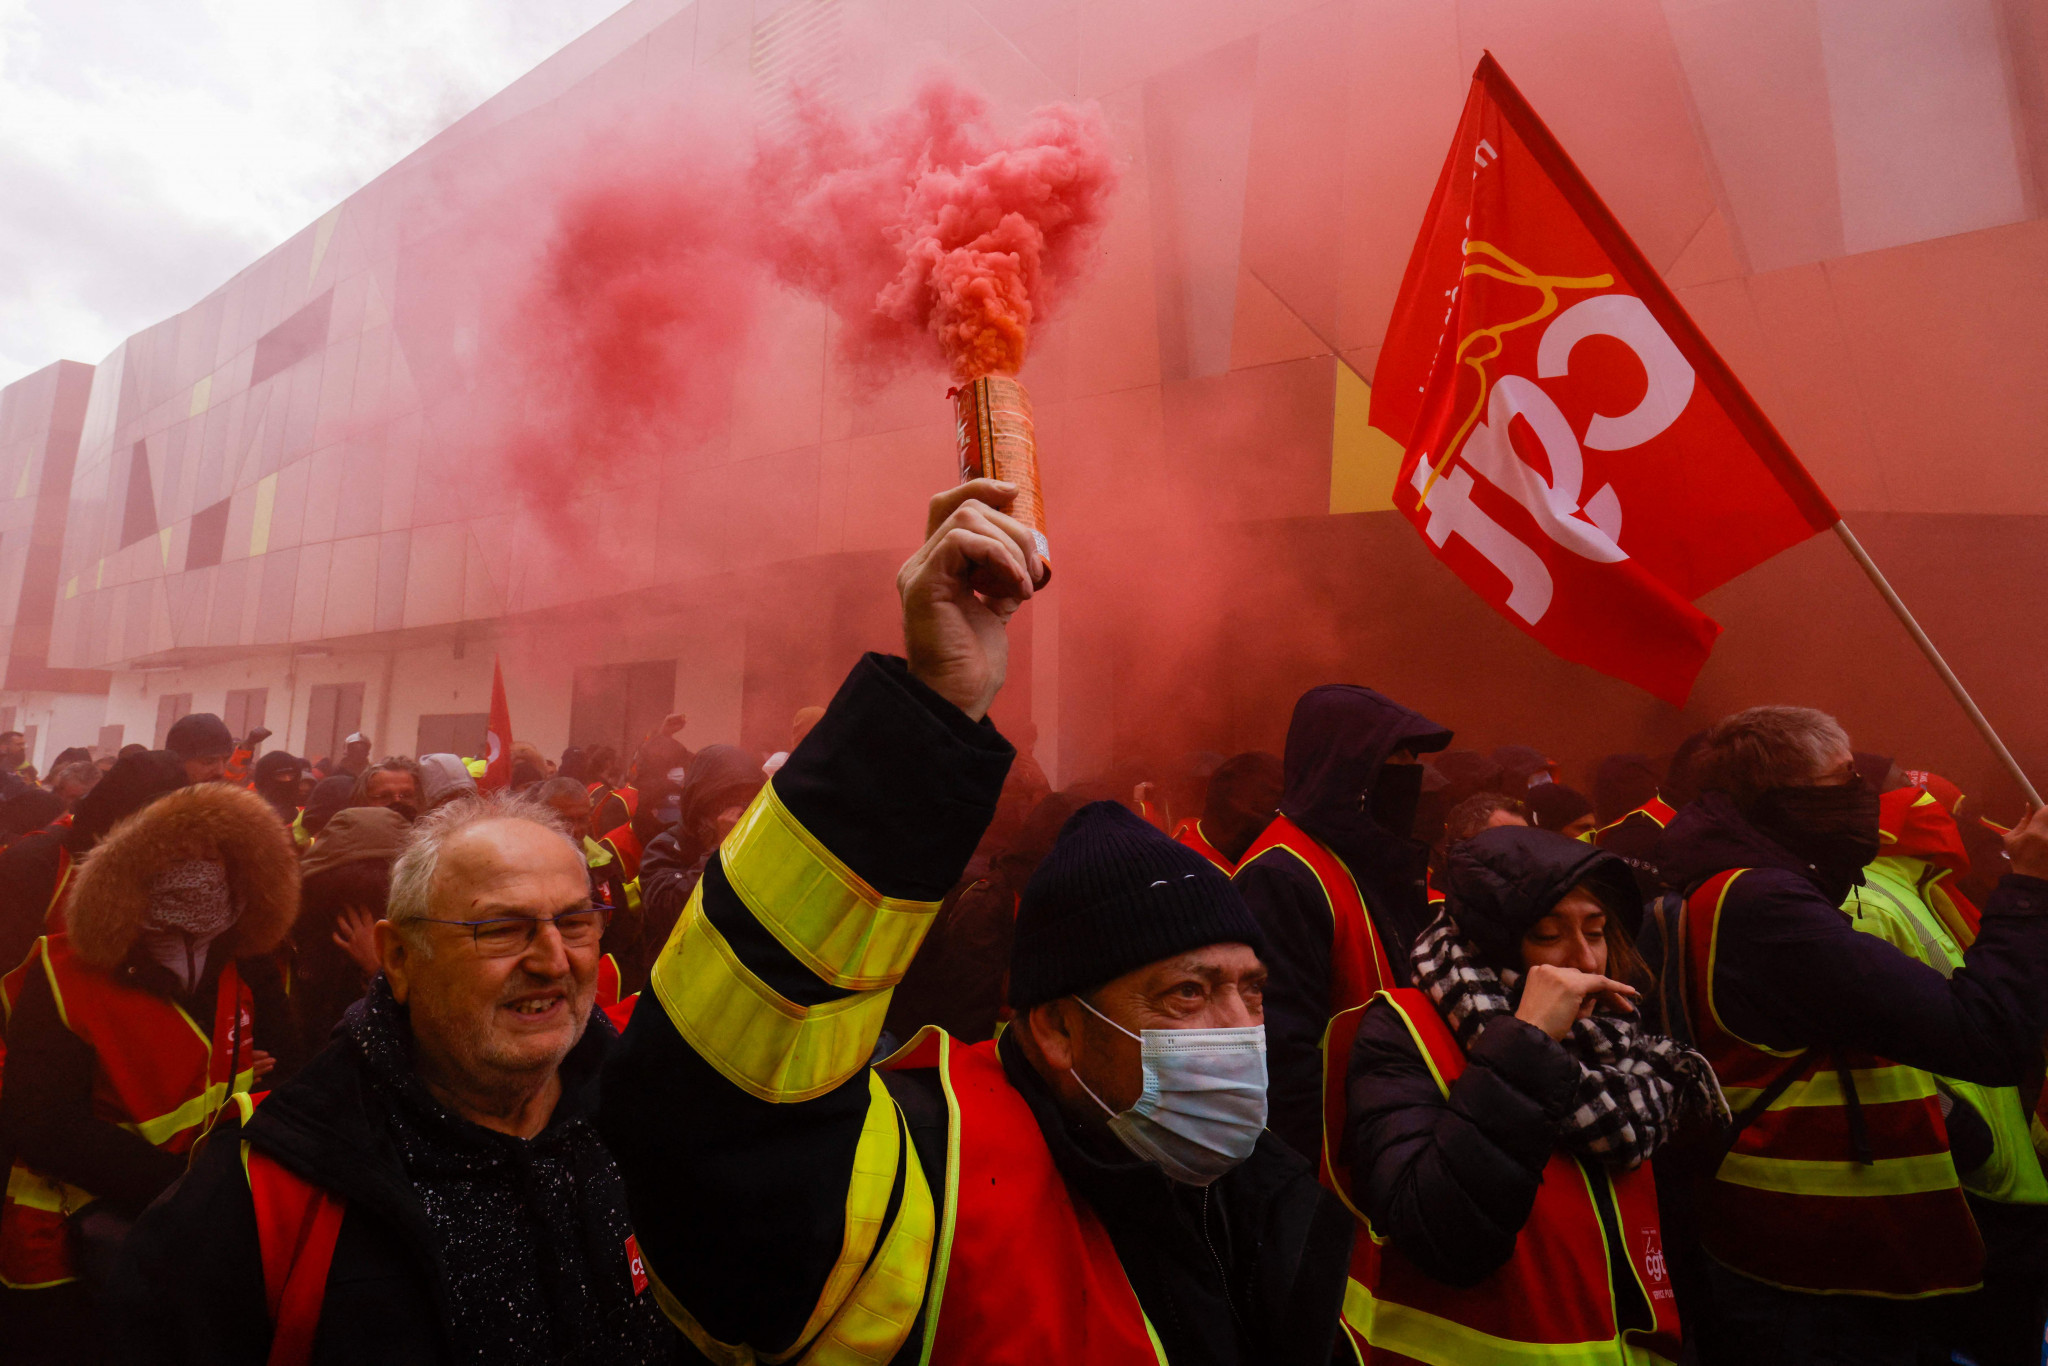 Striking workers cut power to the Paris 2024 Olympic Village construction site during protests against a proposed increase in France's retirement age ©Getty Images